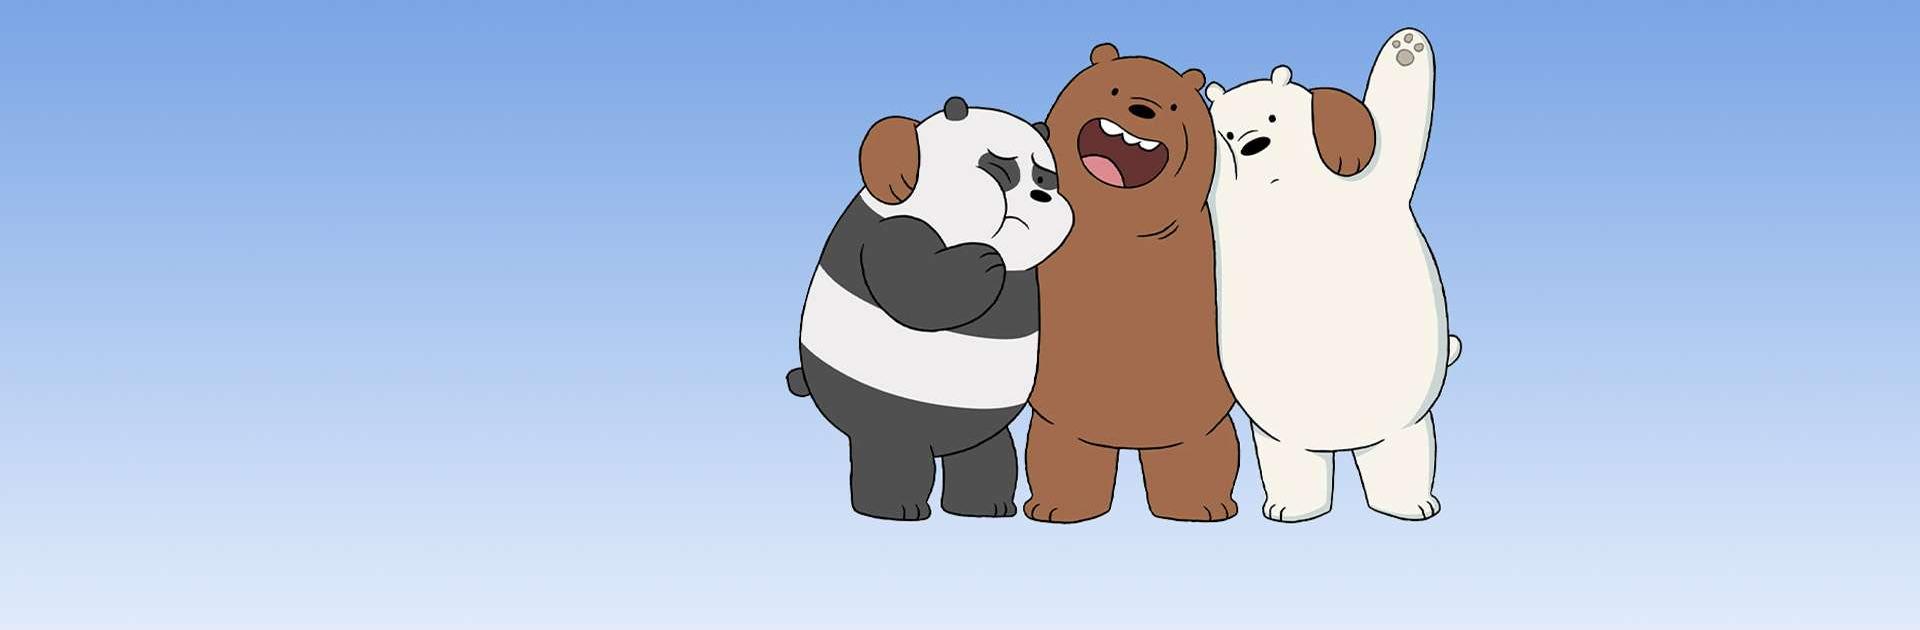 Play We Bare Bears Online